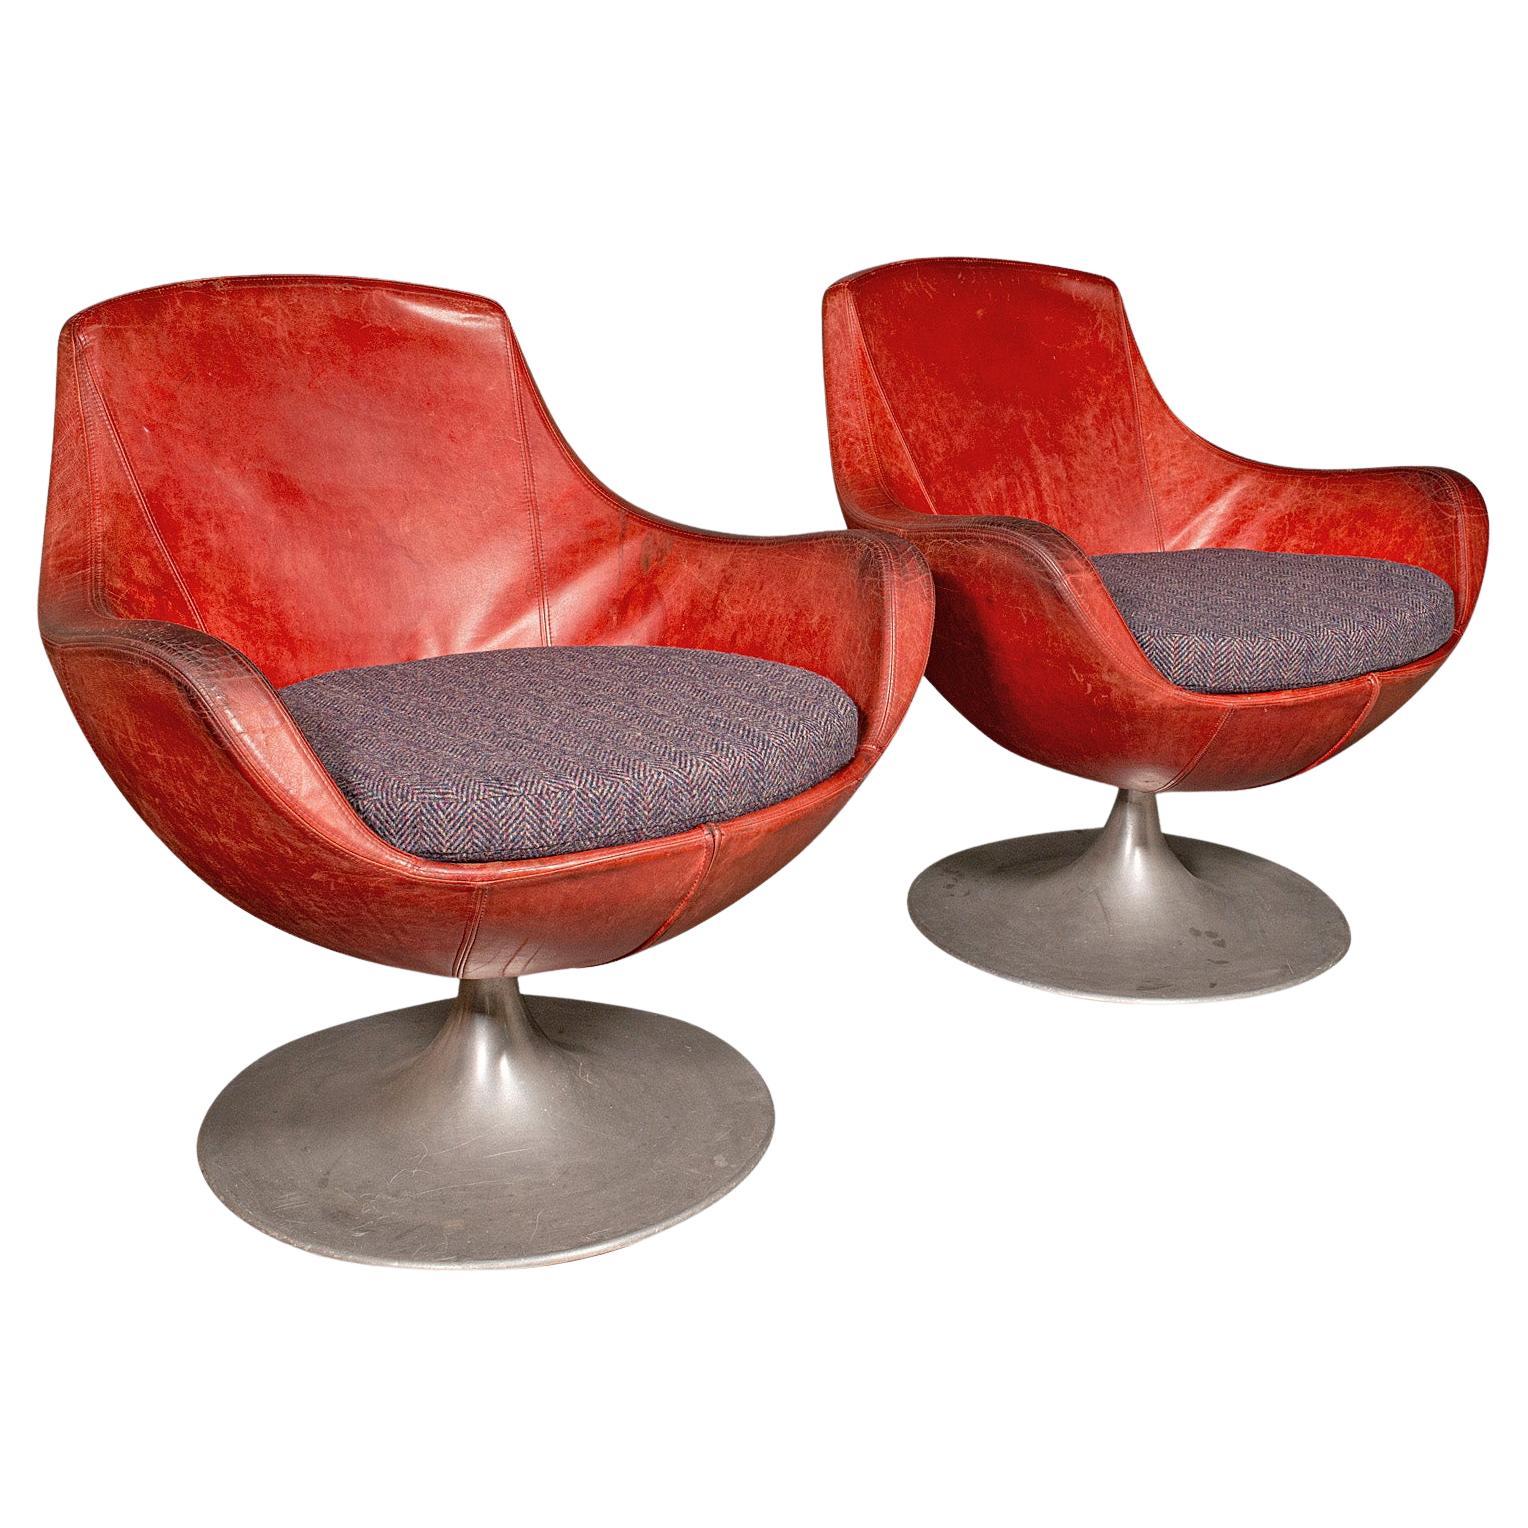 Pair Of Vintage Swivel Tub Chairs, Italian, Leather, Lounge Seat, Circa 1970 For Sale